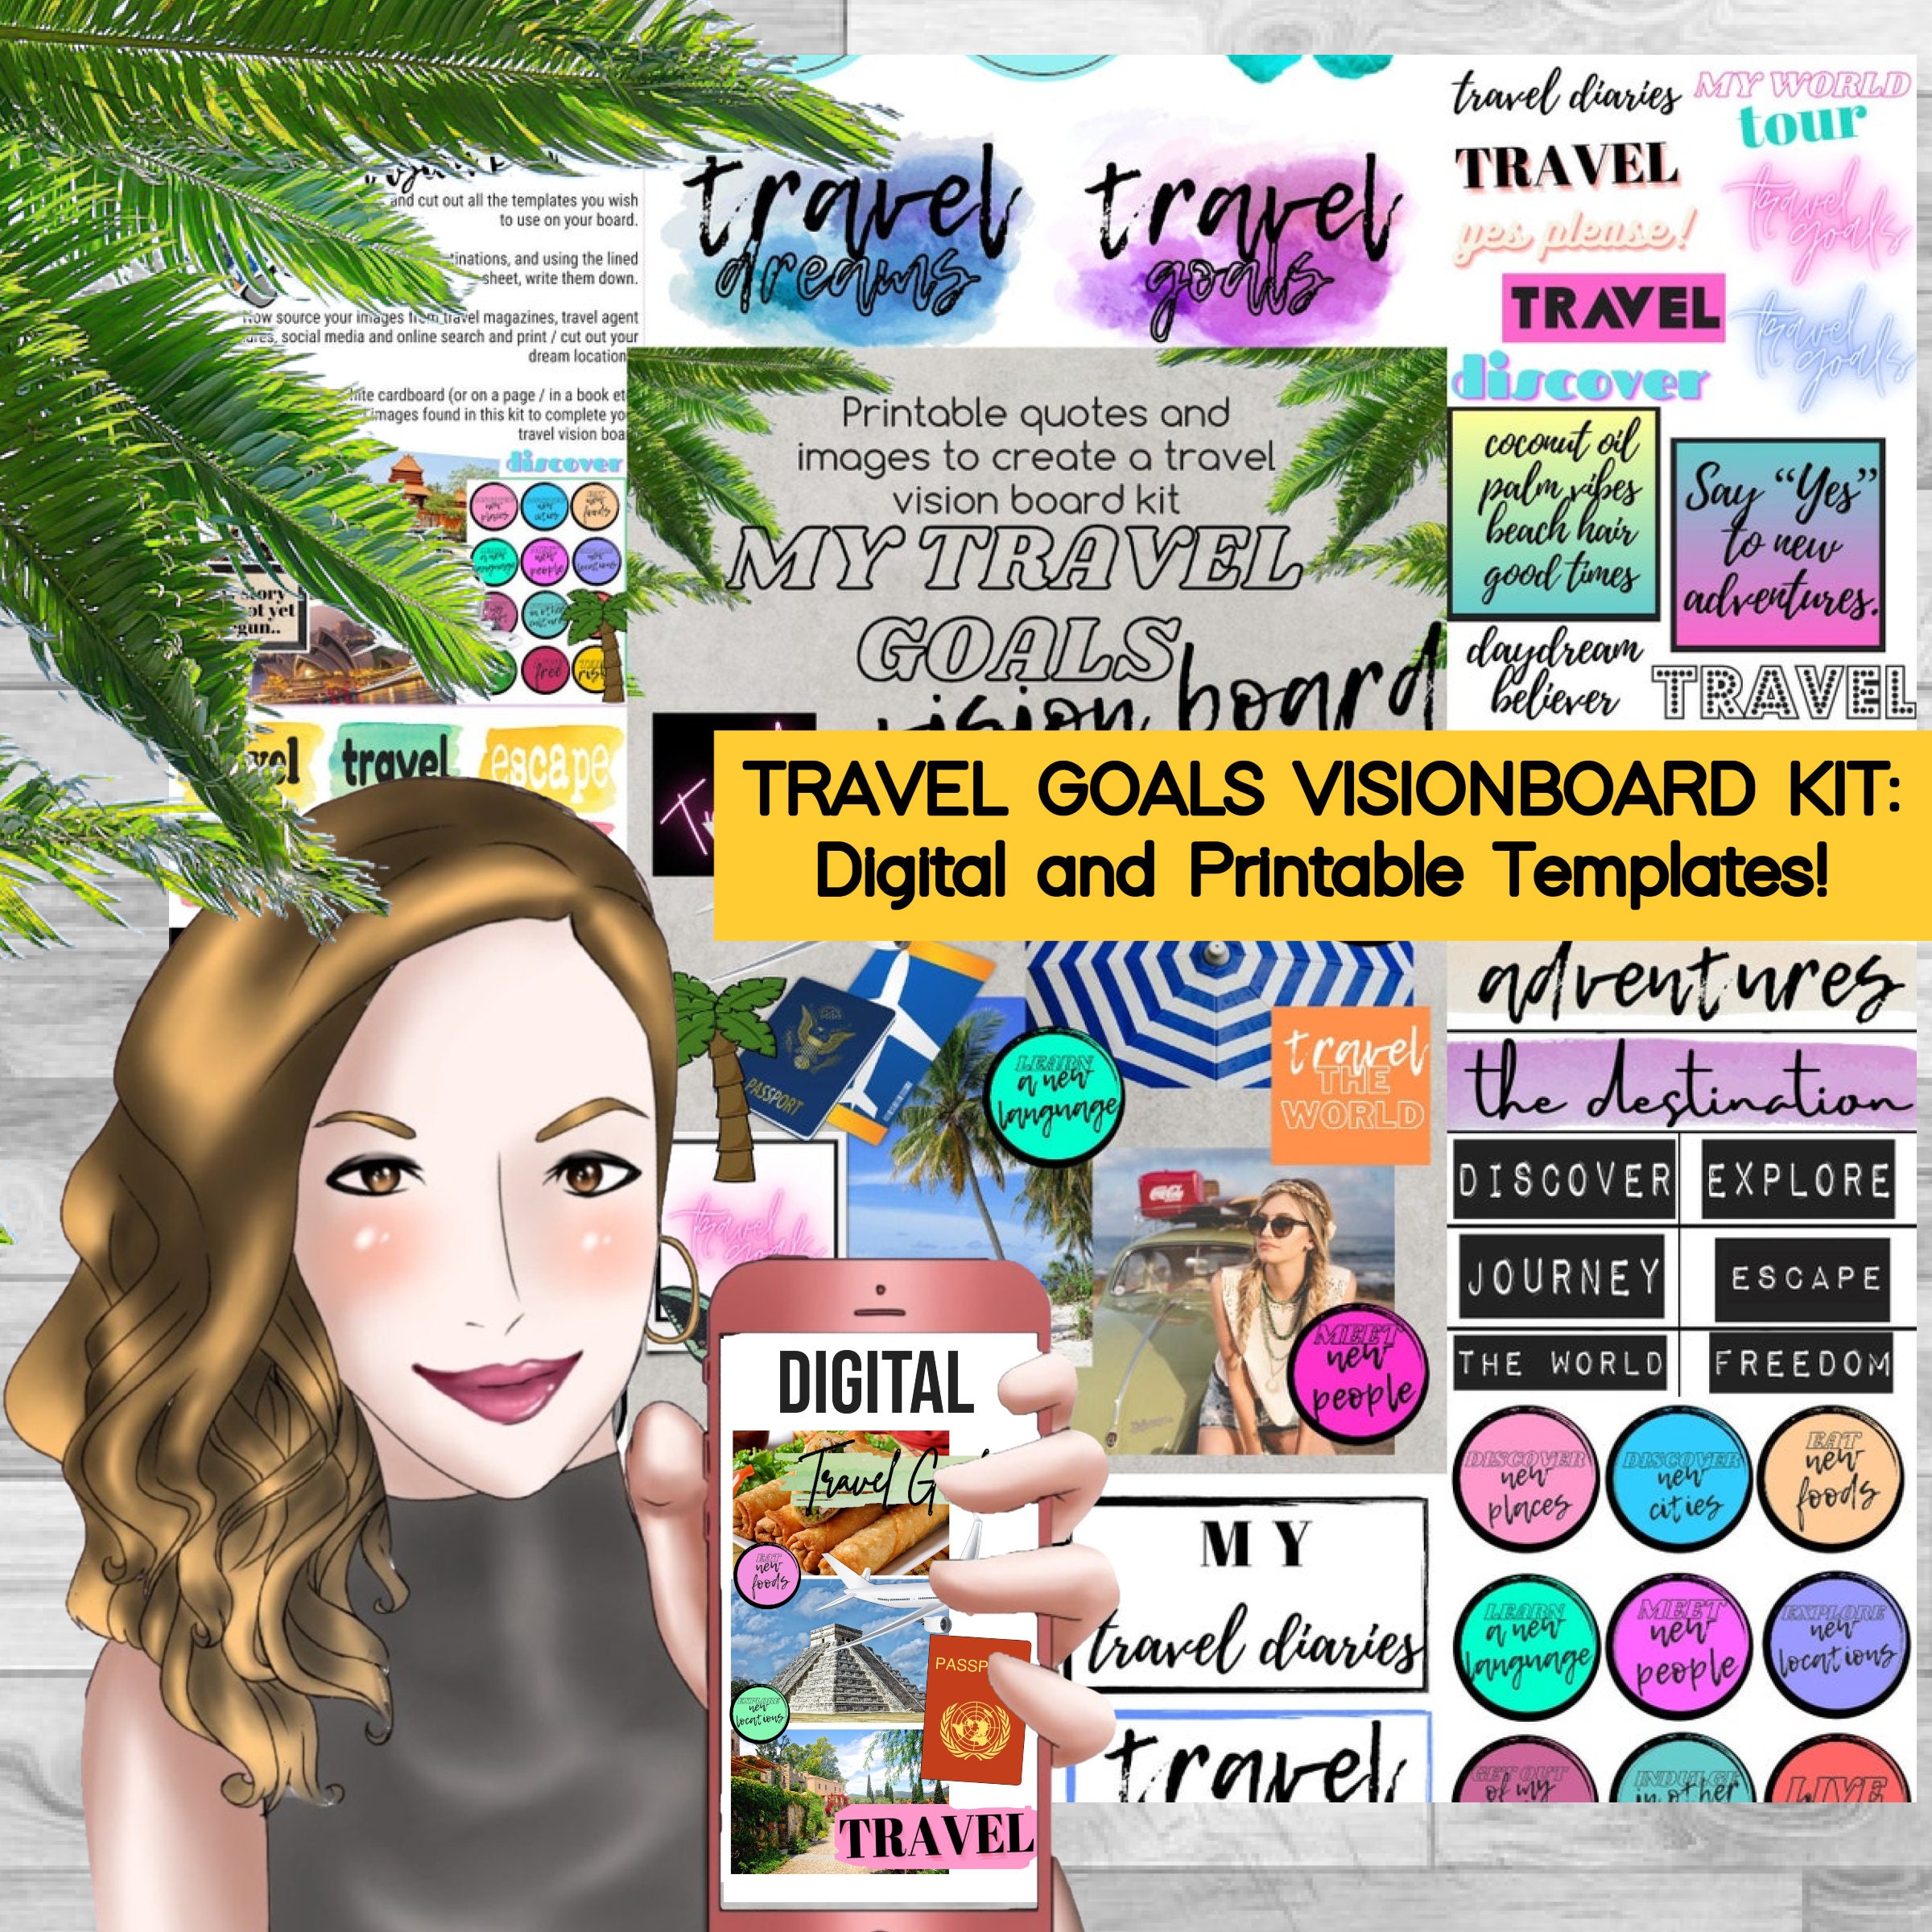 2023 Vision Board Clip Art Book: Design Your Dream Year with A Beautiful & Inspiring Collection of 500+ Images, Words, Phrases, Affirmations & More